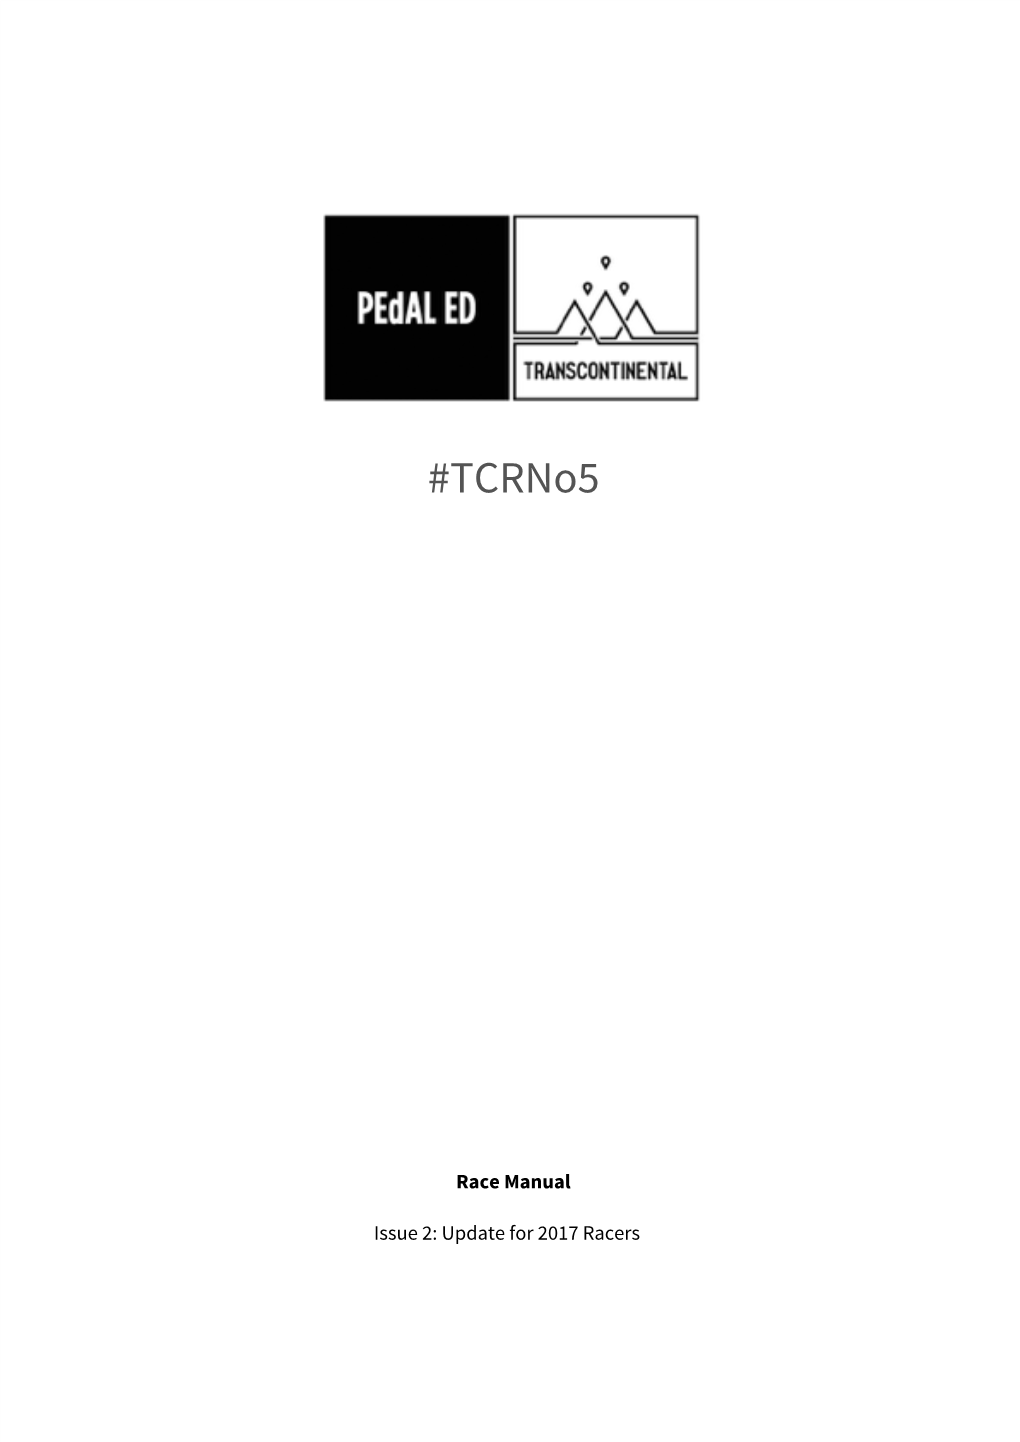 Tcrno5-Race-Manual-Issue-2.Pdf